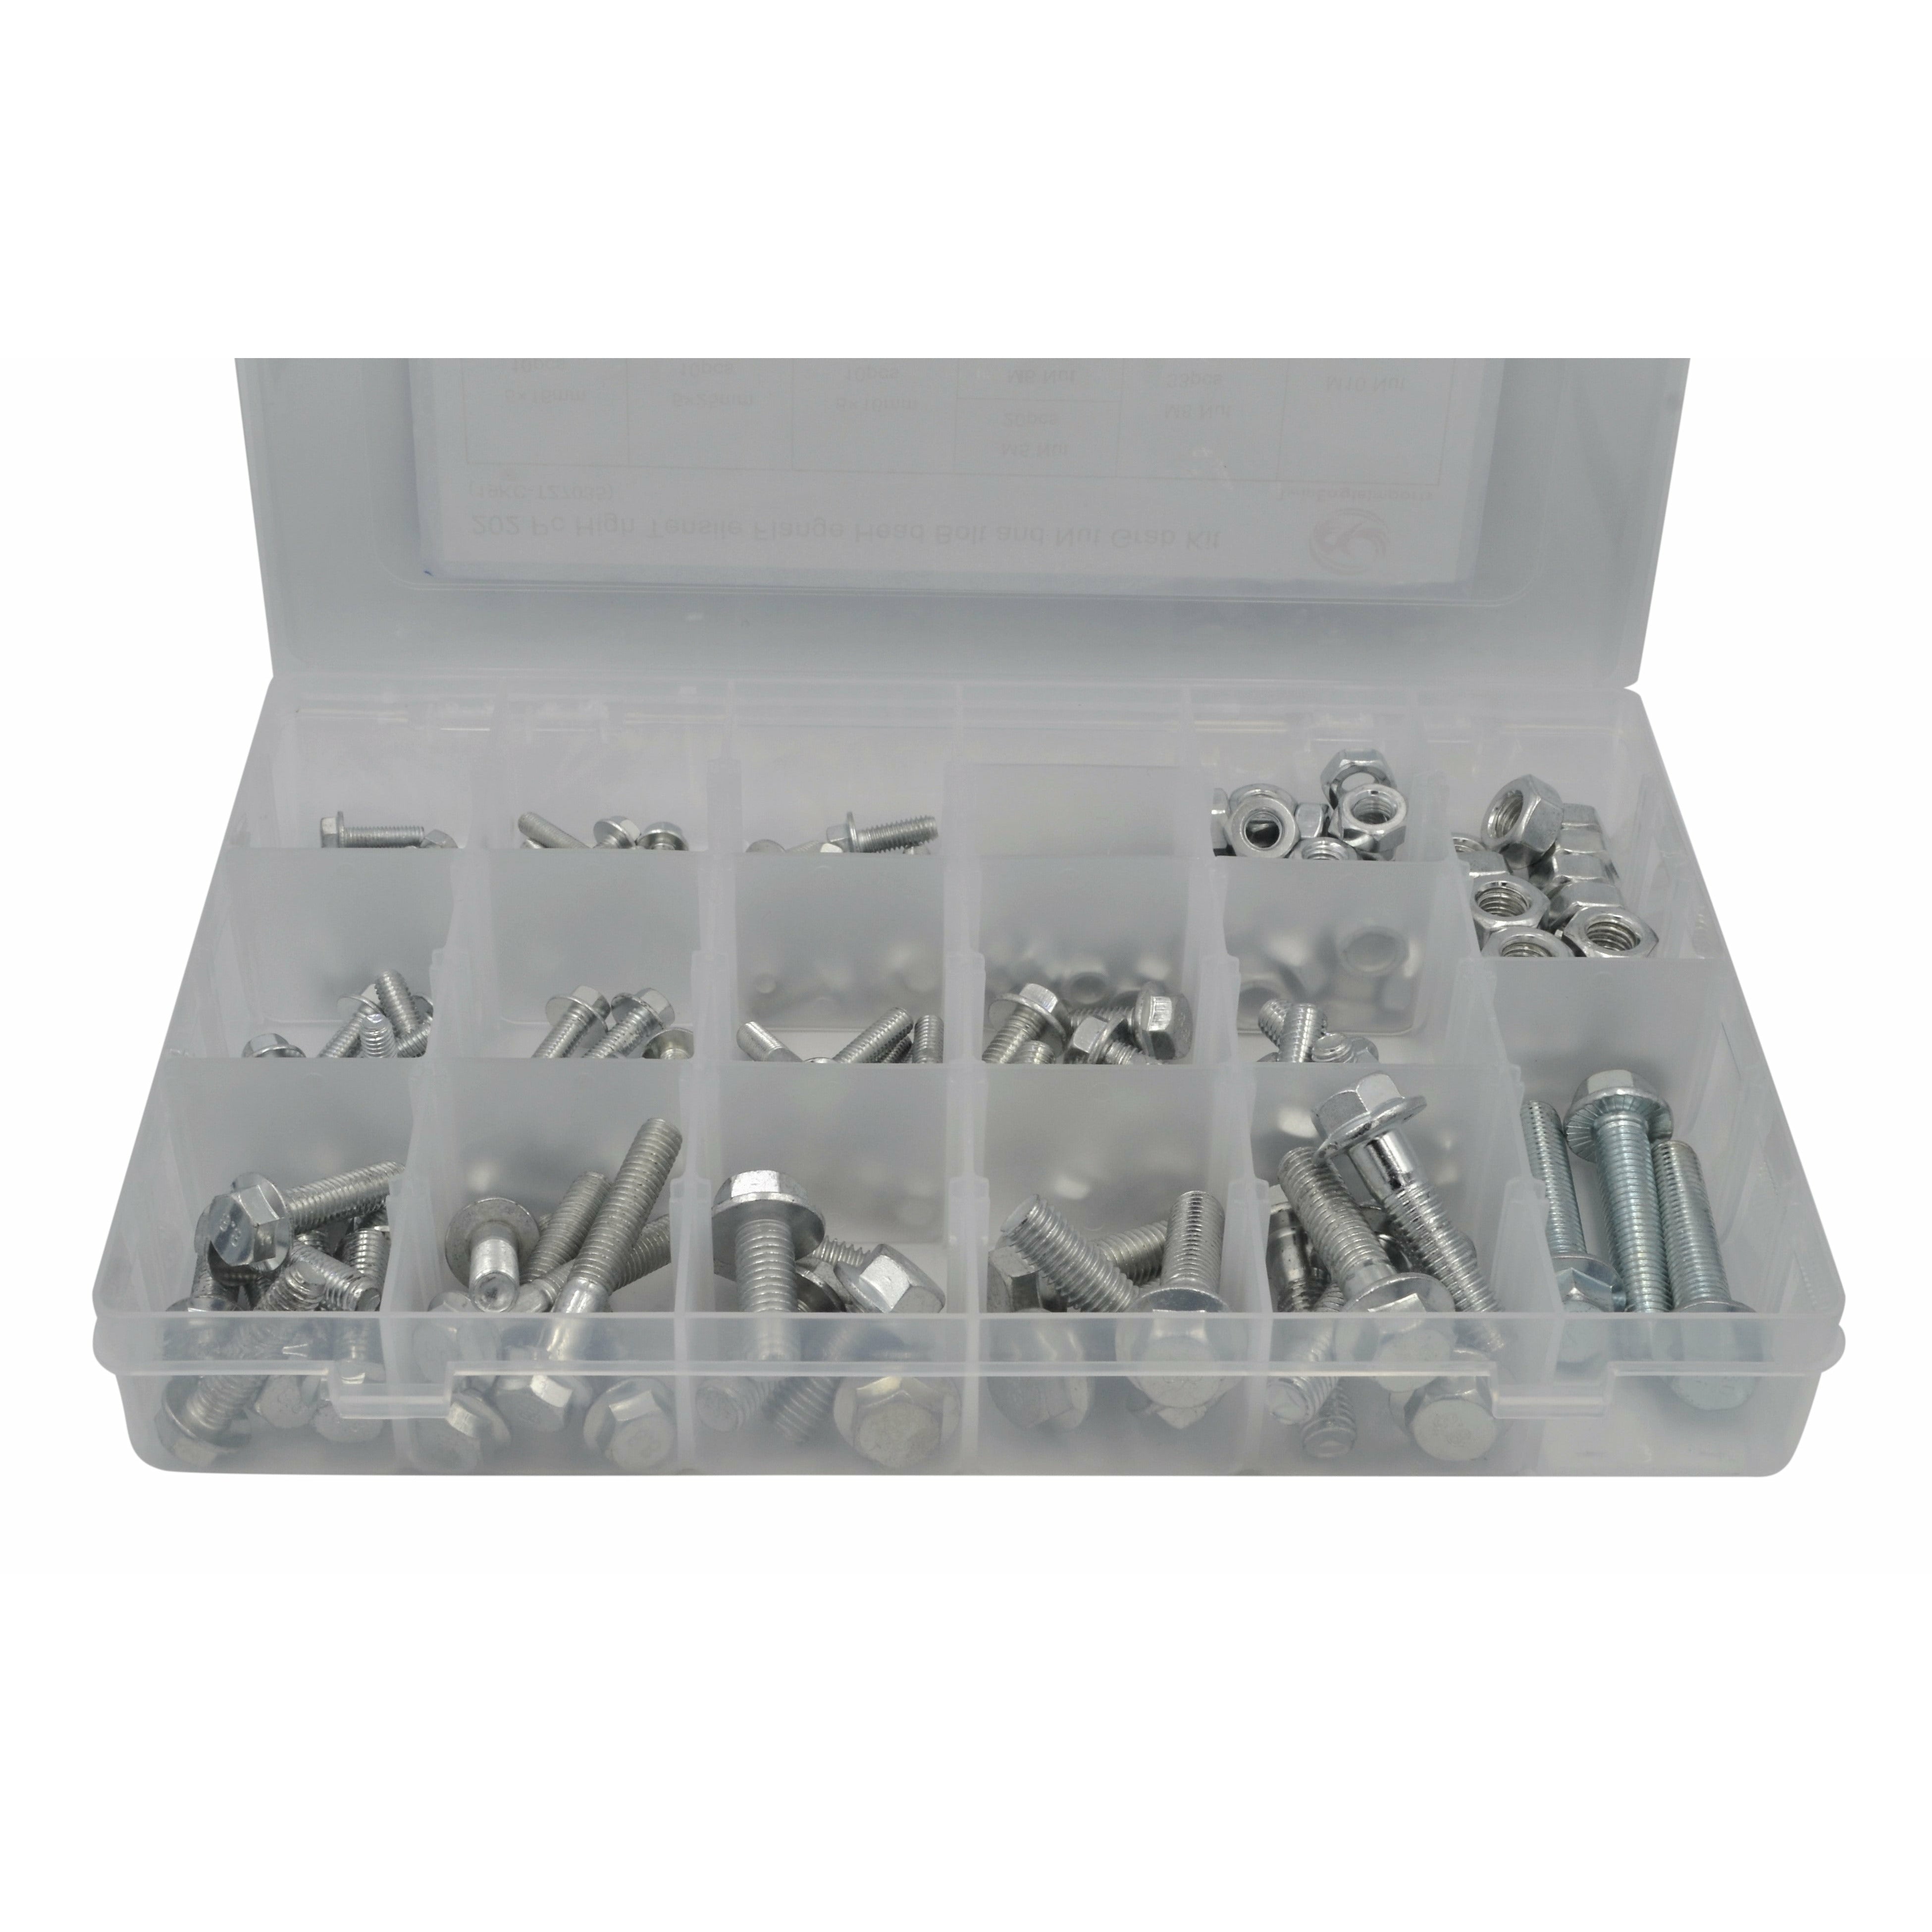 202 pc High Tensile 8.8 Flange Head Bolt and Nut Grab Kit Assortment M5 - M10